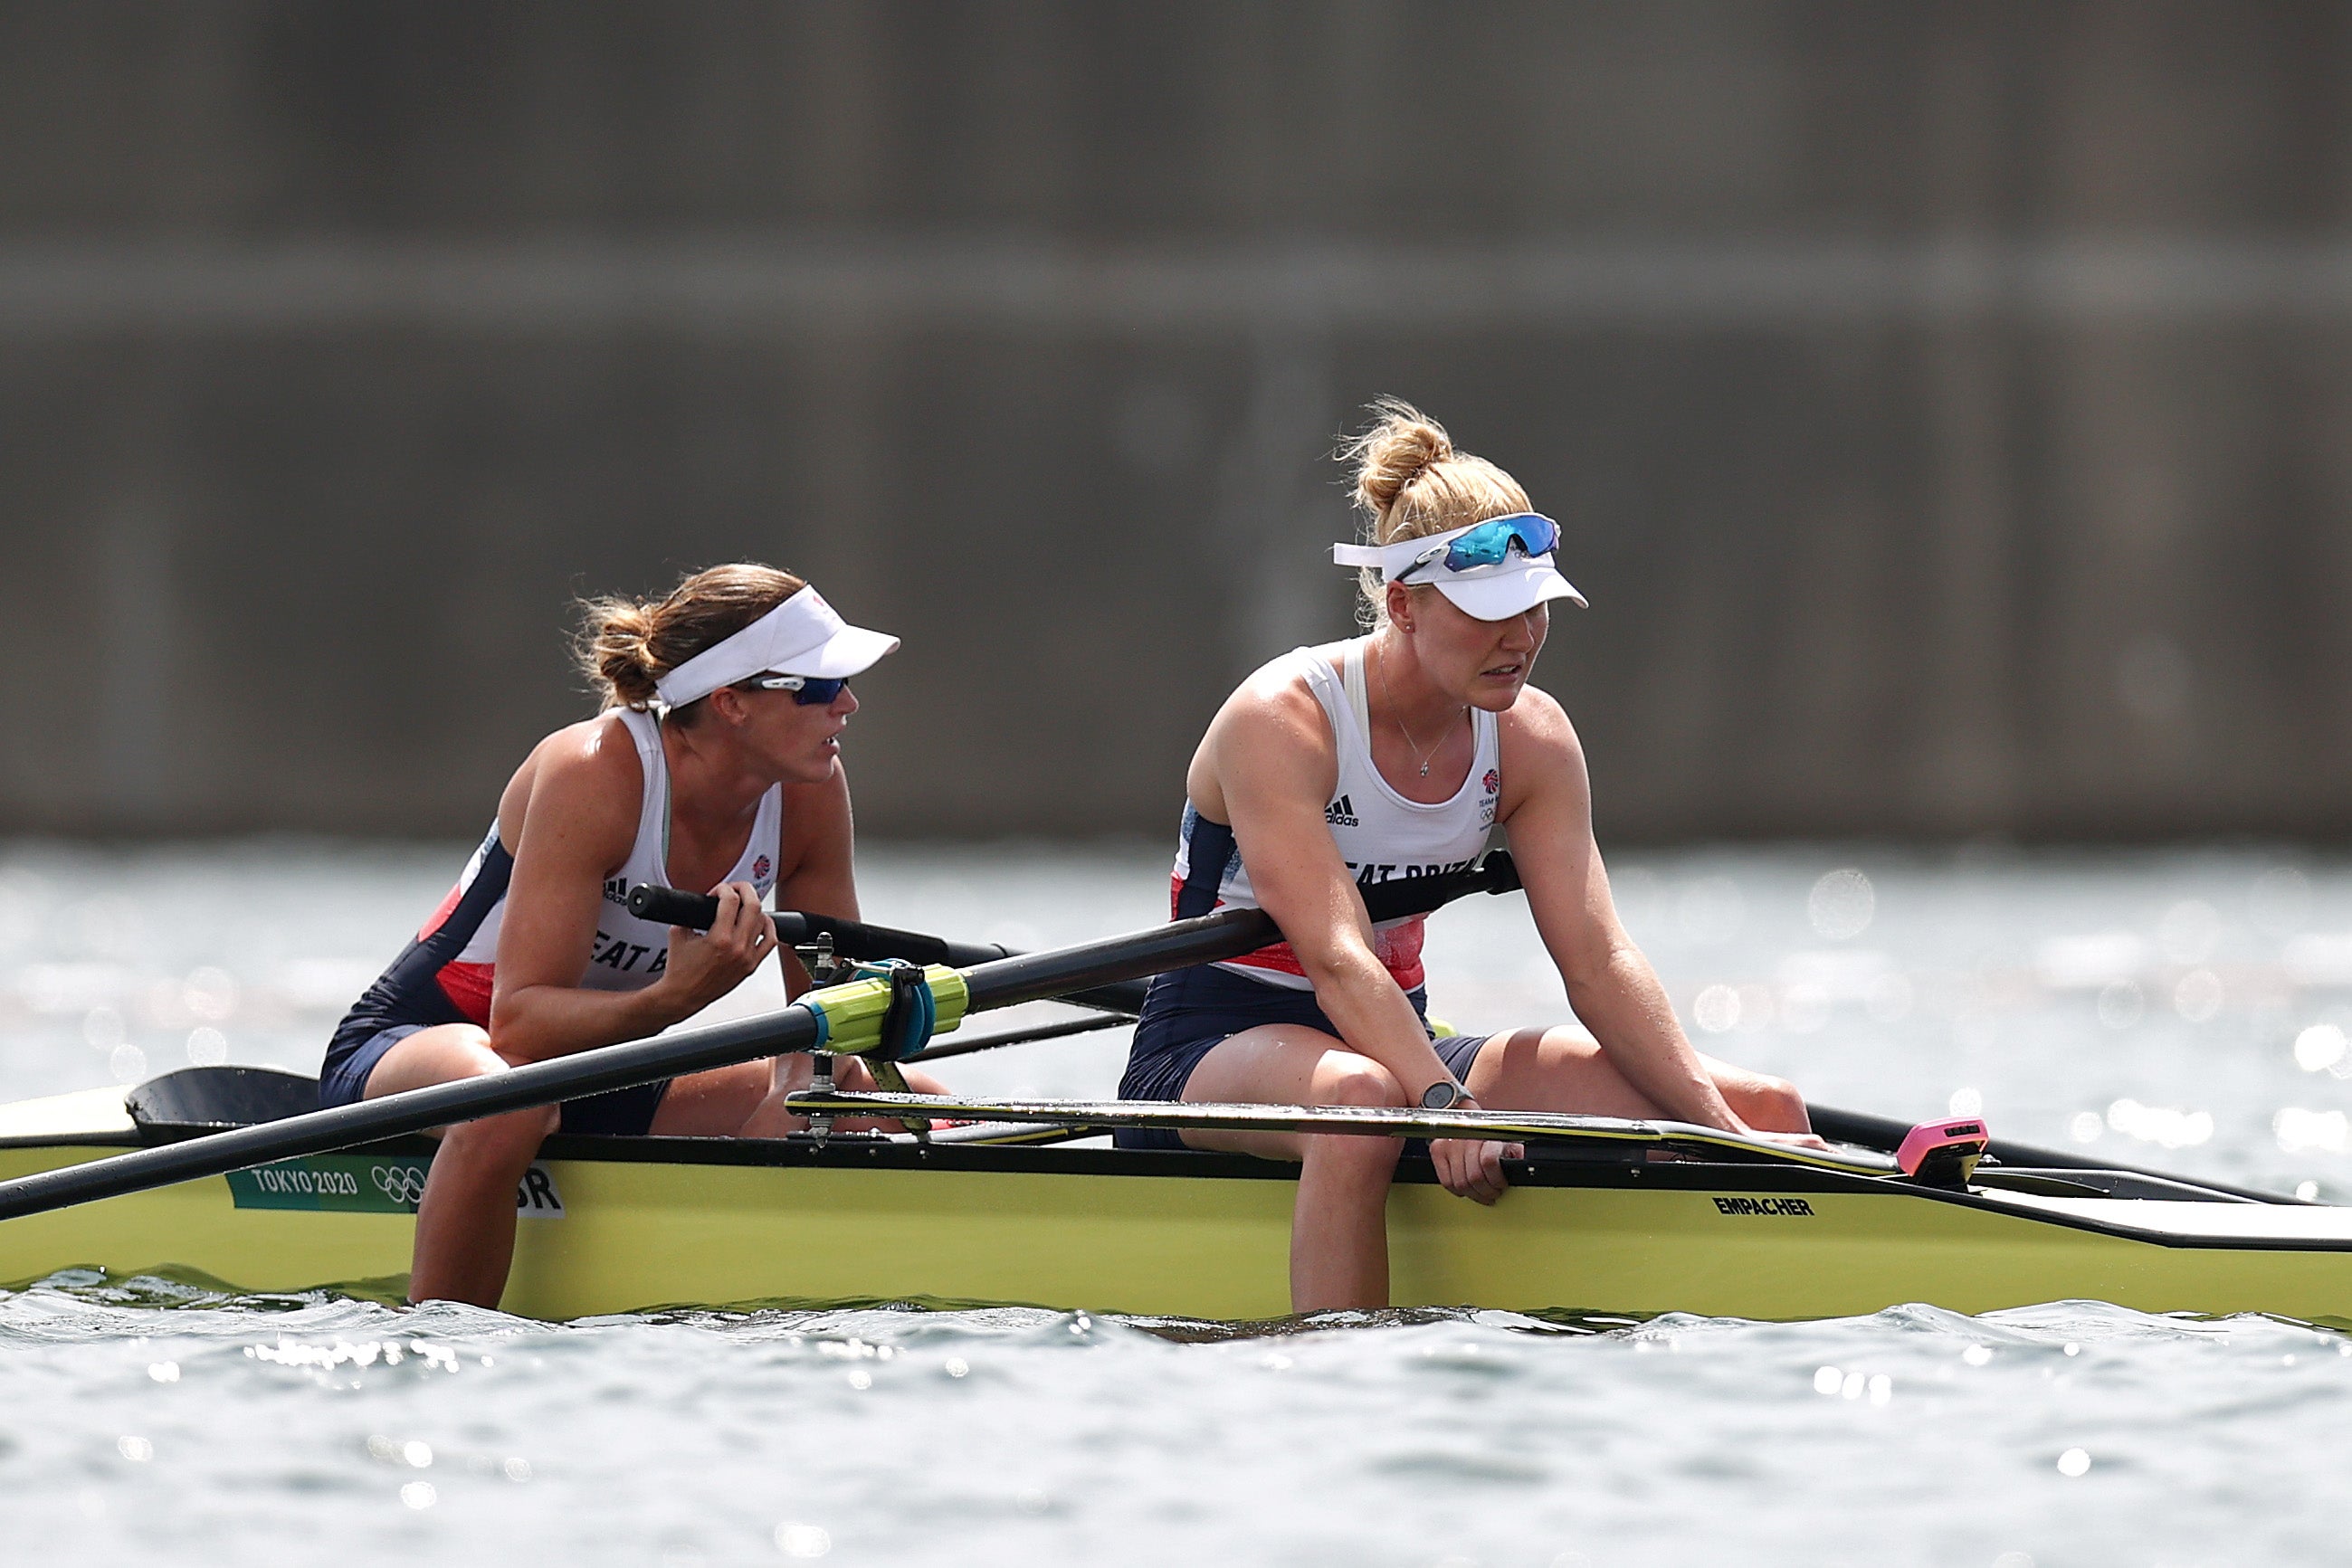 Helen Glover (left) and Polly Swann of Team GB react after coming in fourth in the women’s pair final